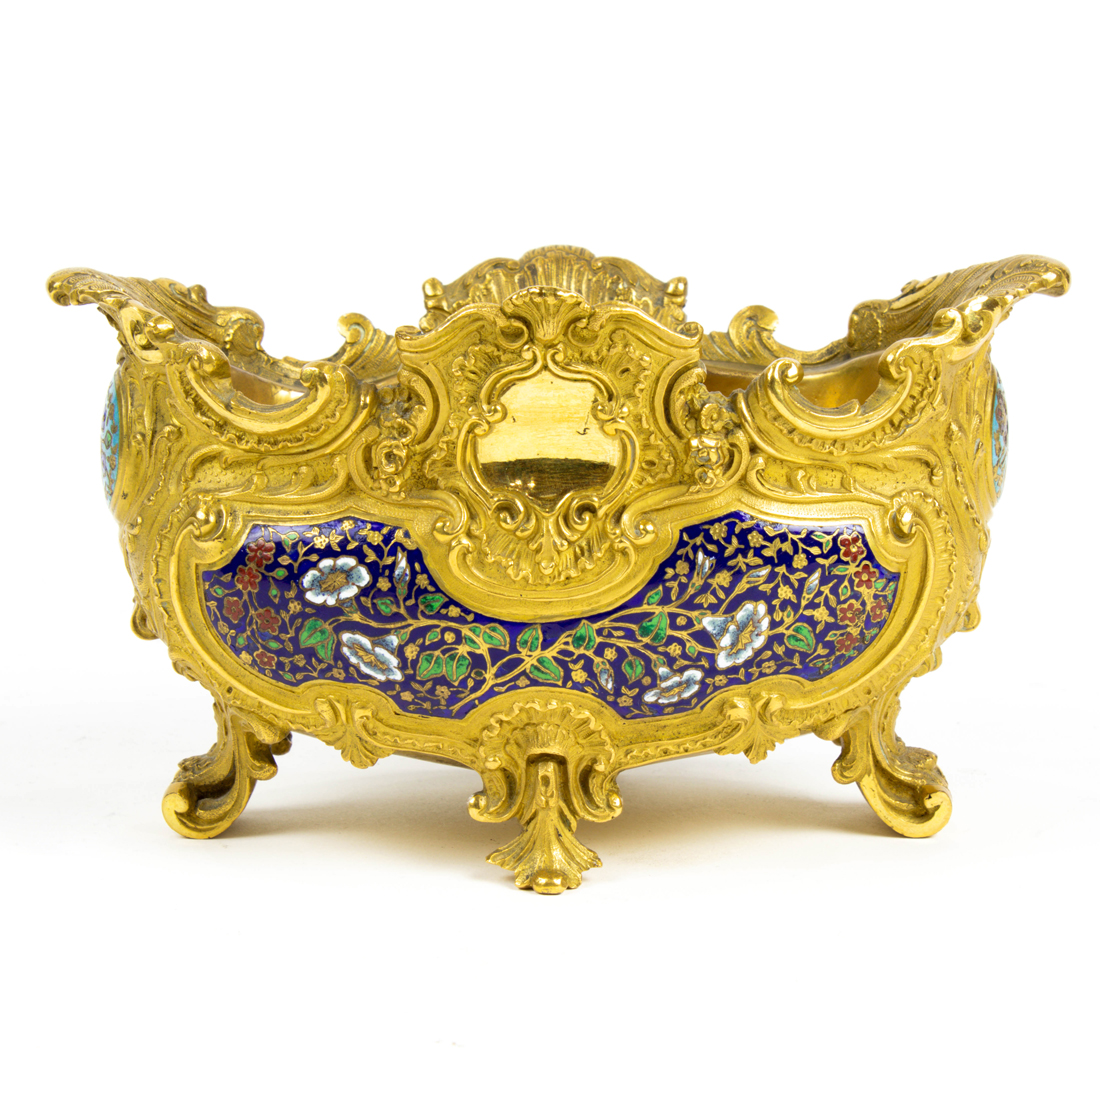 FRENCH CHAMPLEVE ENAMEL AND BRONZE